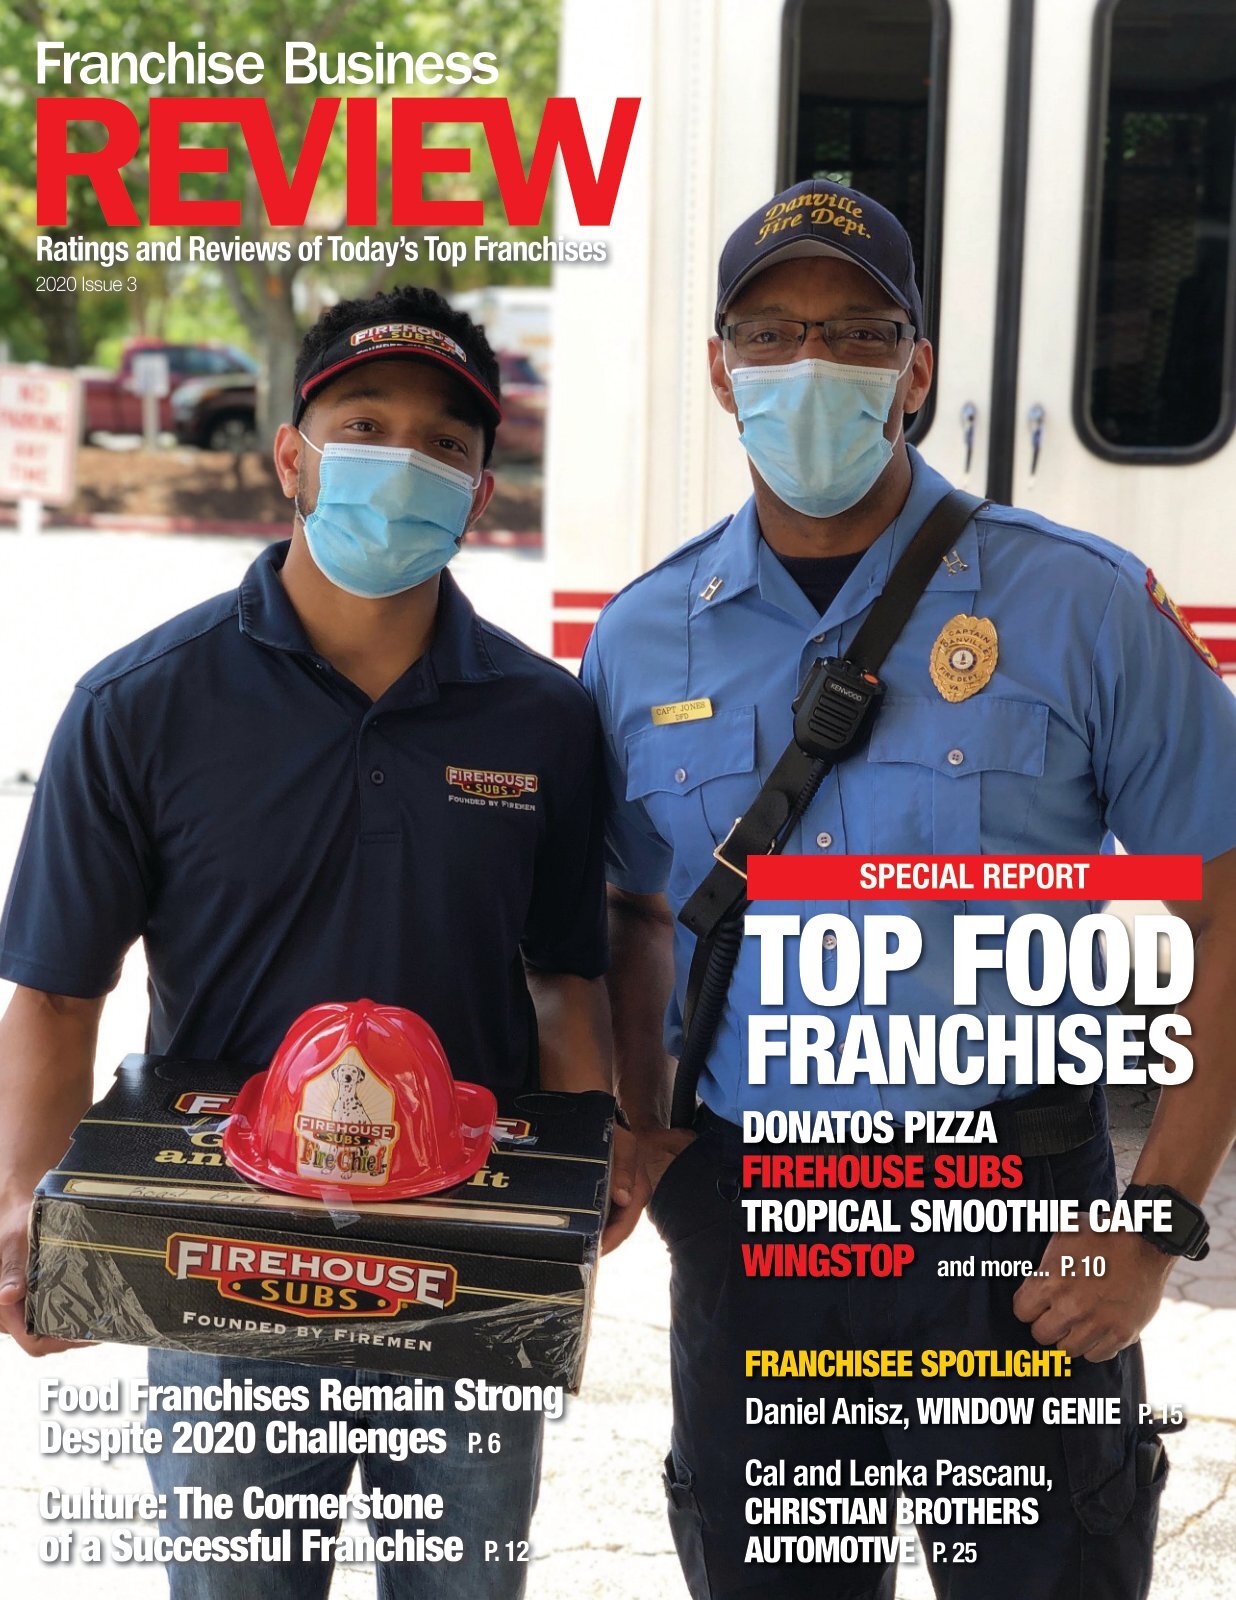 FBR Issue 3 – 2020